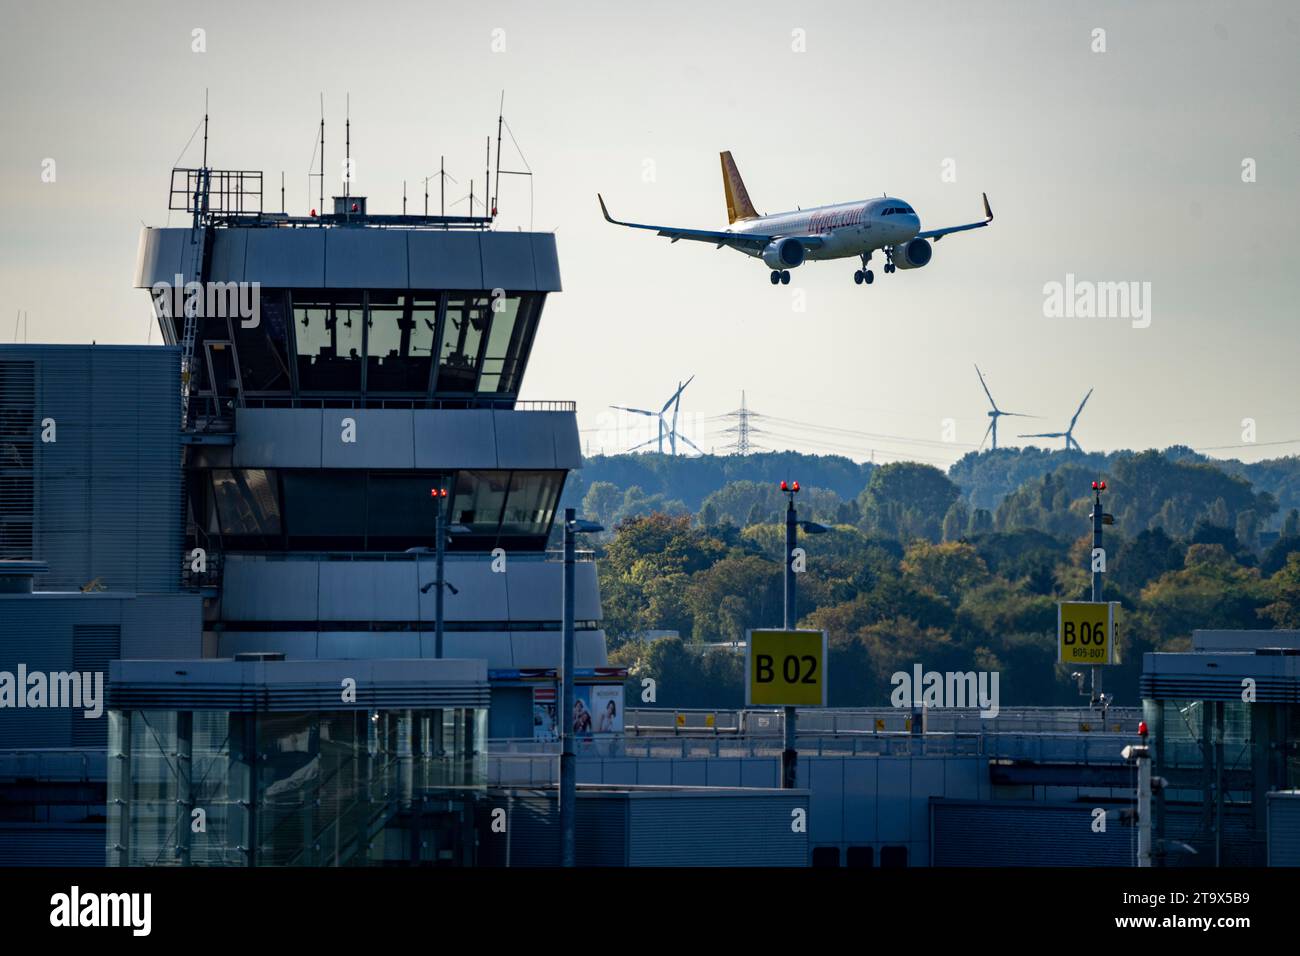 Düsseldorf Airport, Pegasus Airline, Airbus A321neo on approach, old air traffic control tower, Stock Photo